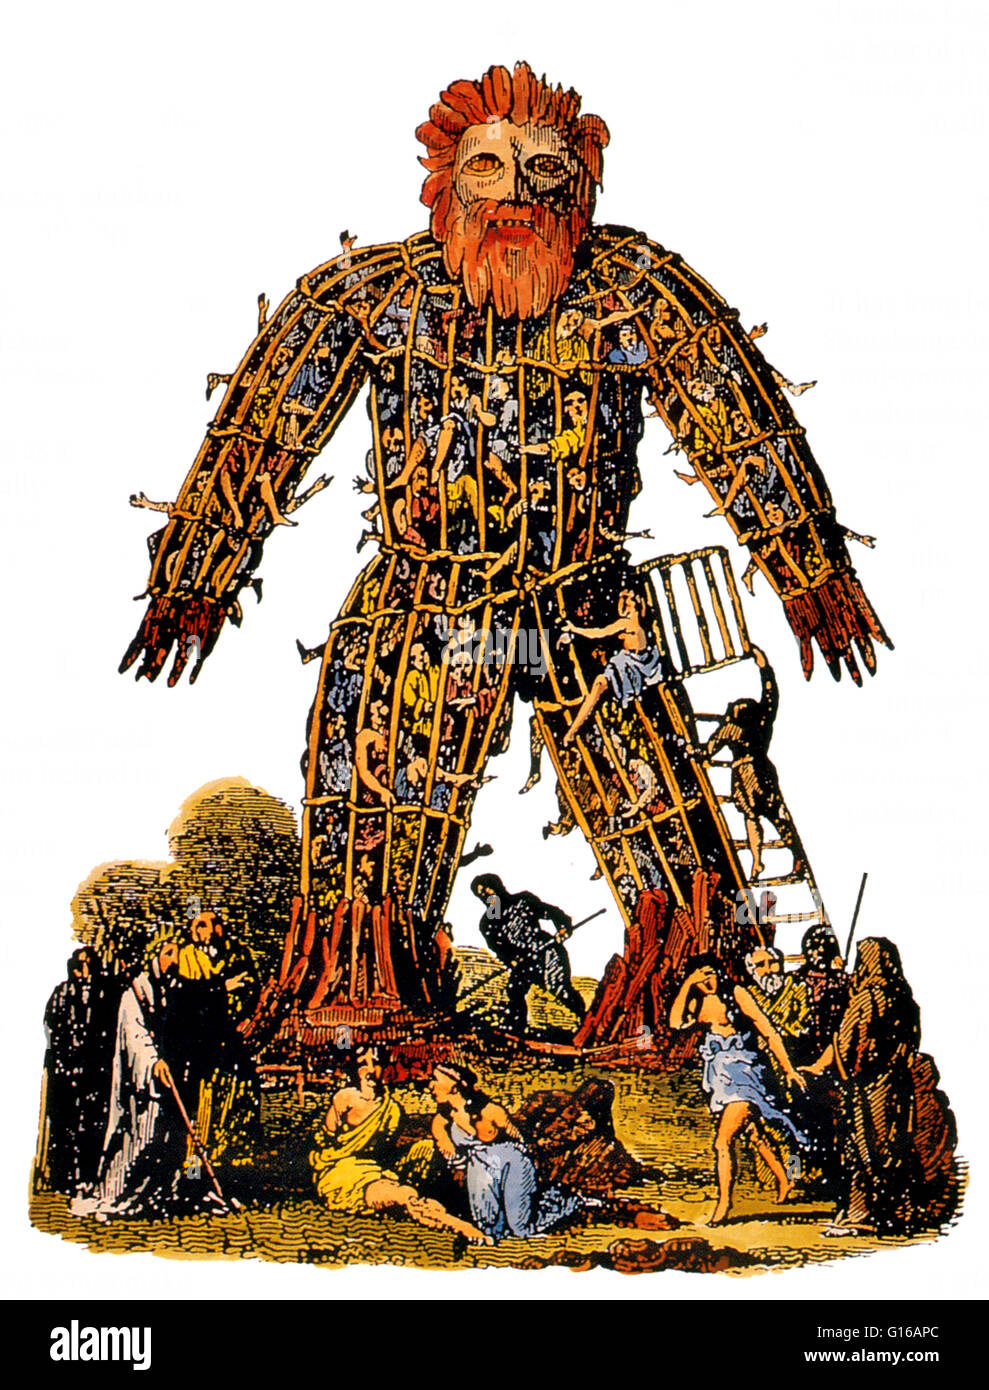 Wicker Man was a Druidic effigy built out wood and straw, then covered with grass to form a giant man. Legend states that the Druids packed the hollow statues with humans and animals and set them alight in sacrifice to the Celtic gods Taranis, Esus and Te Stock Photo